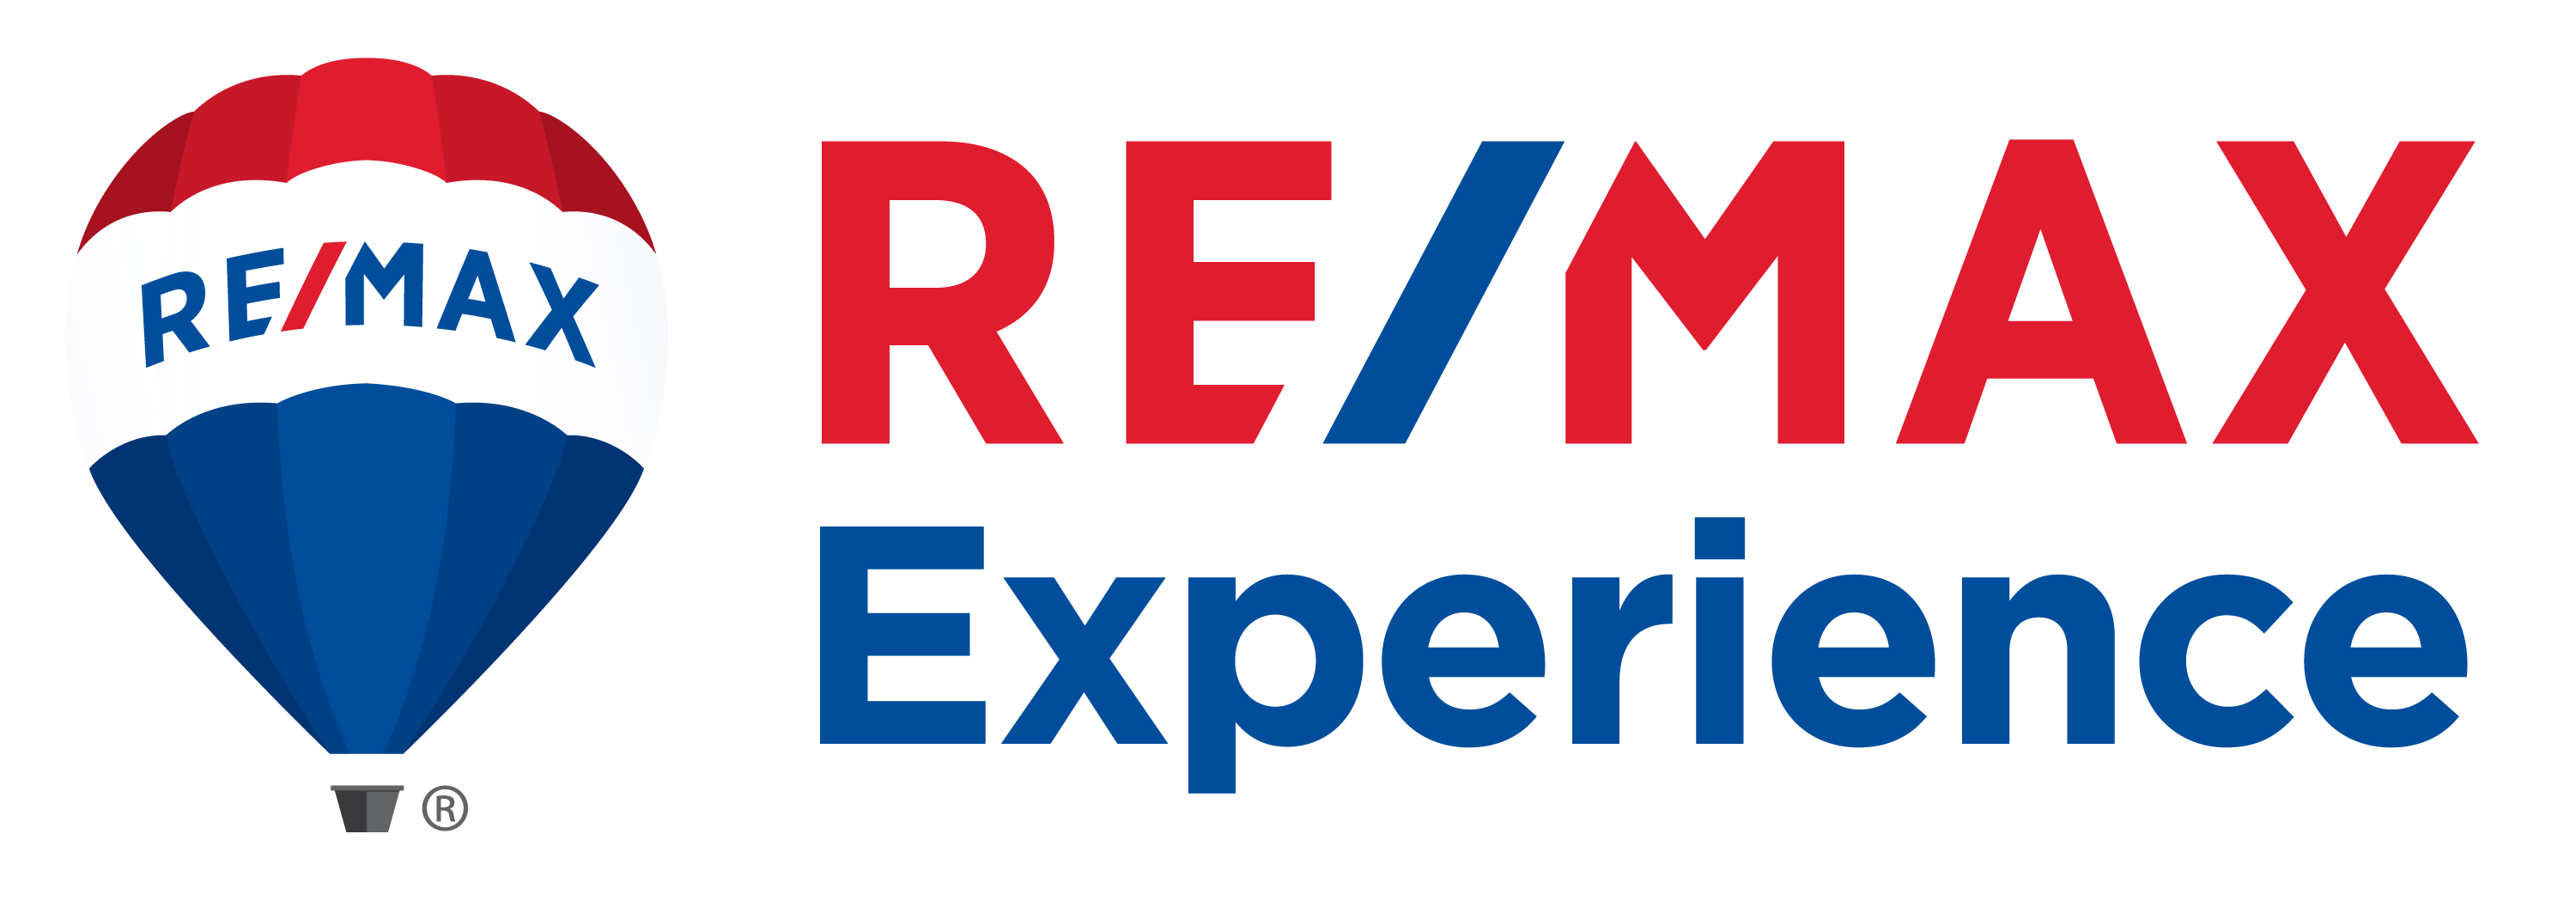 REMAX EXPERIENCE